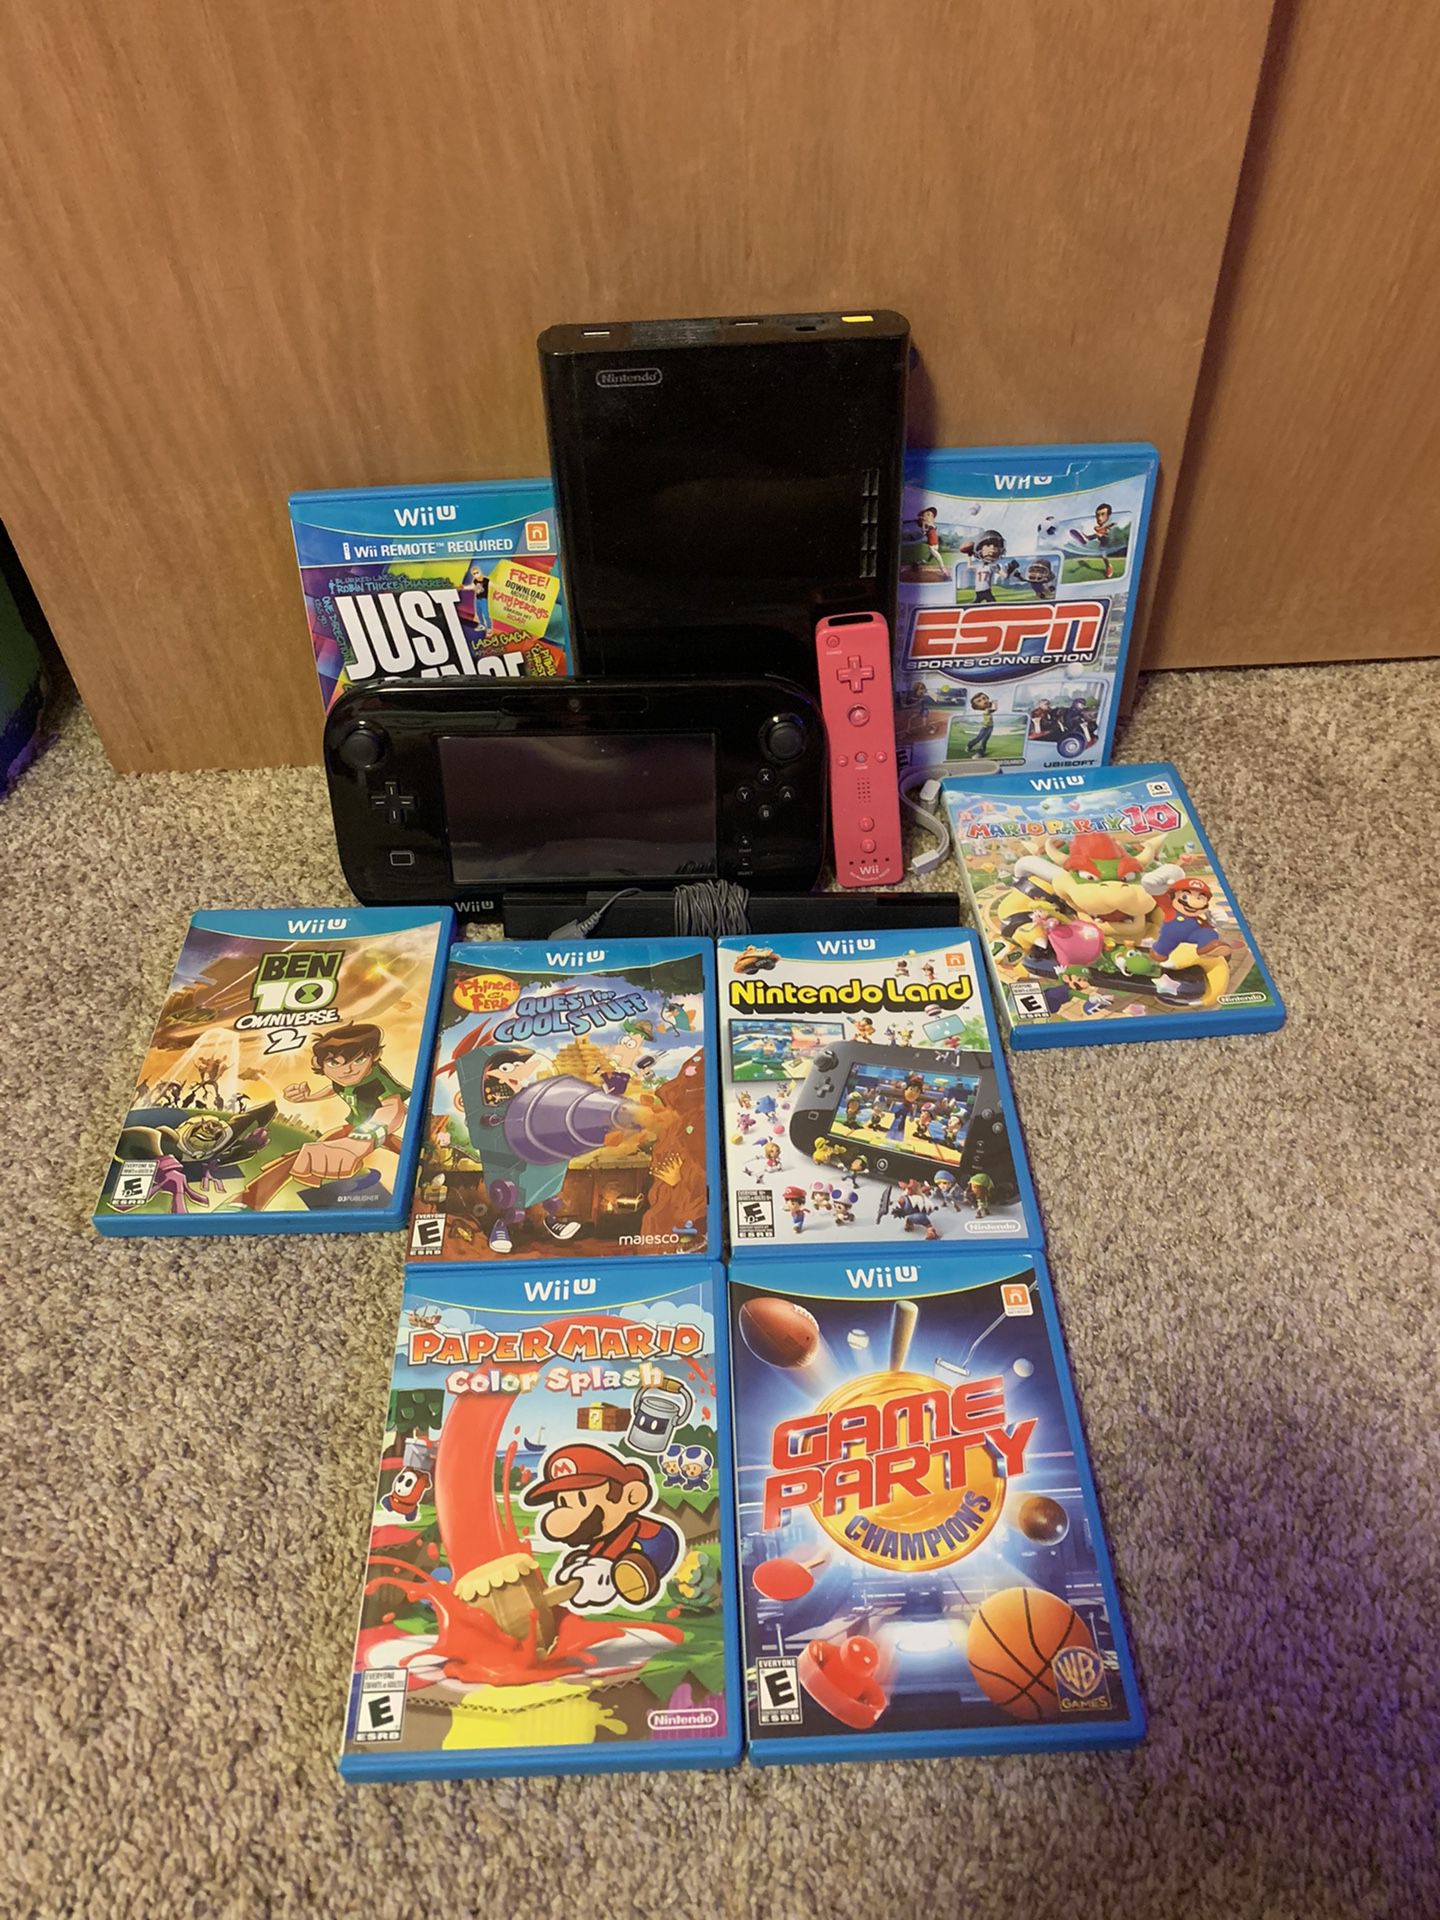 2016 black wii u with antena, pink wii controller, and 8 wii u games